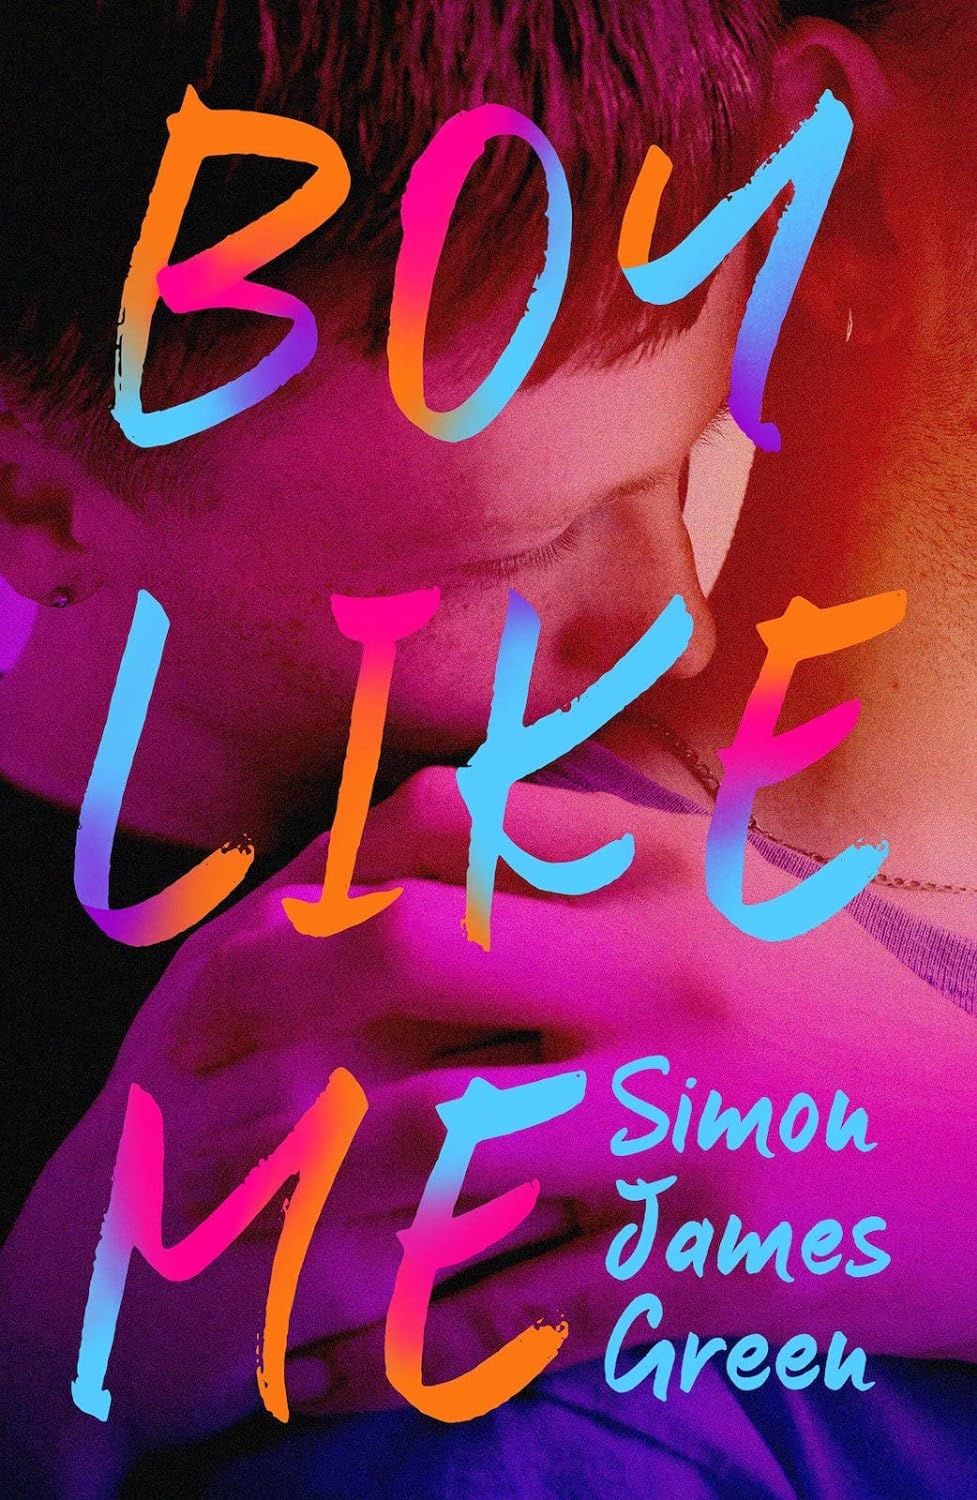 Two young white boys are on the cover for Boy Like Me. One boy stands behind the other, his hand on the other's shoulder, his head lovingly in the crook of the other boy's neck/ The cursive, handwritten font for the title and author name is in the colours orange, blue, and pink.